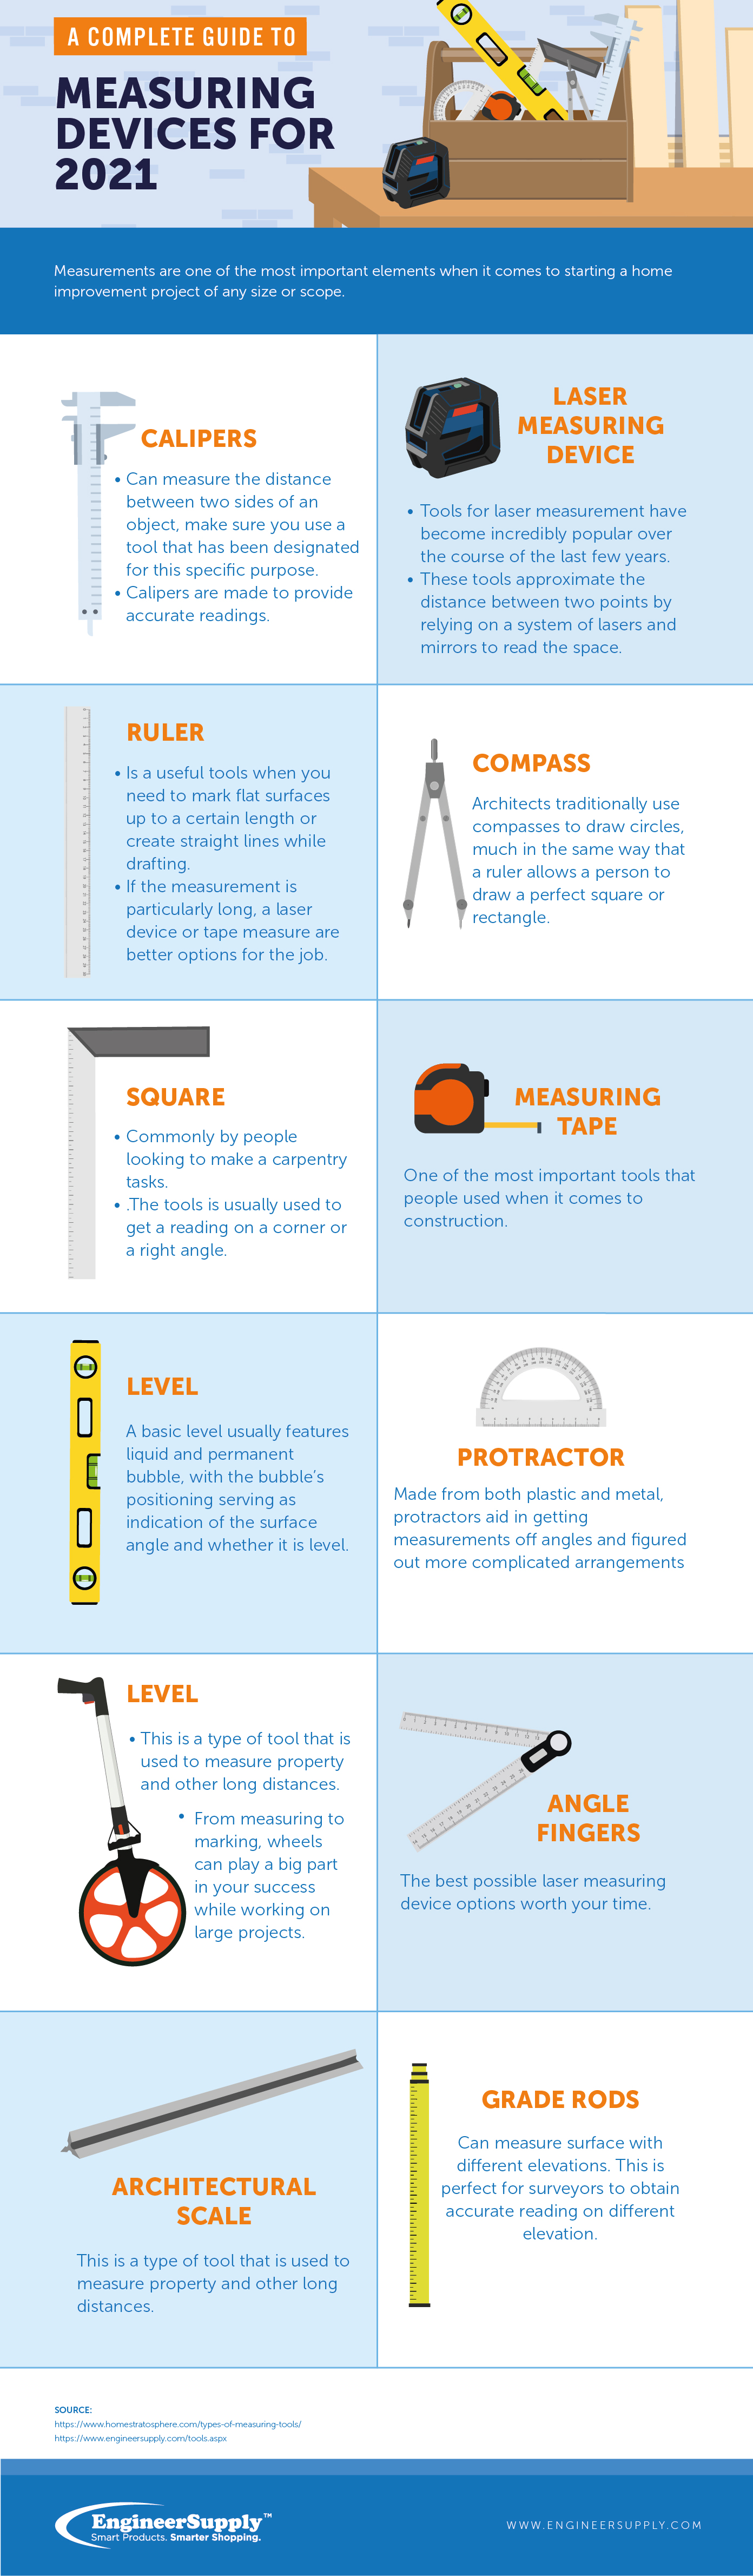 infographic Measuring Devices Guide: 2021